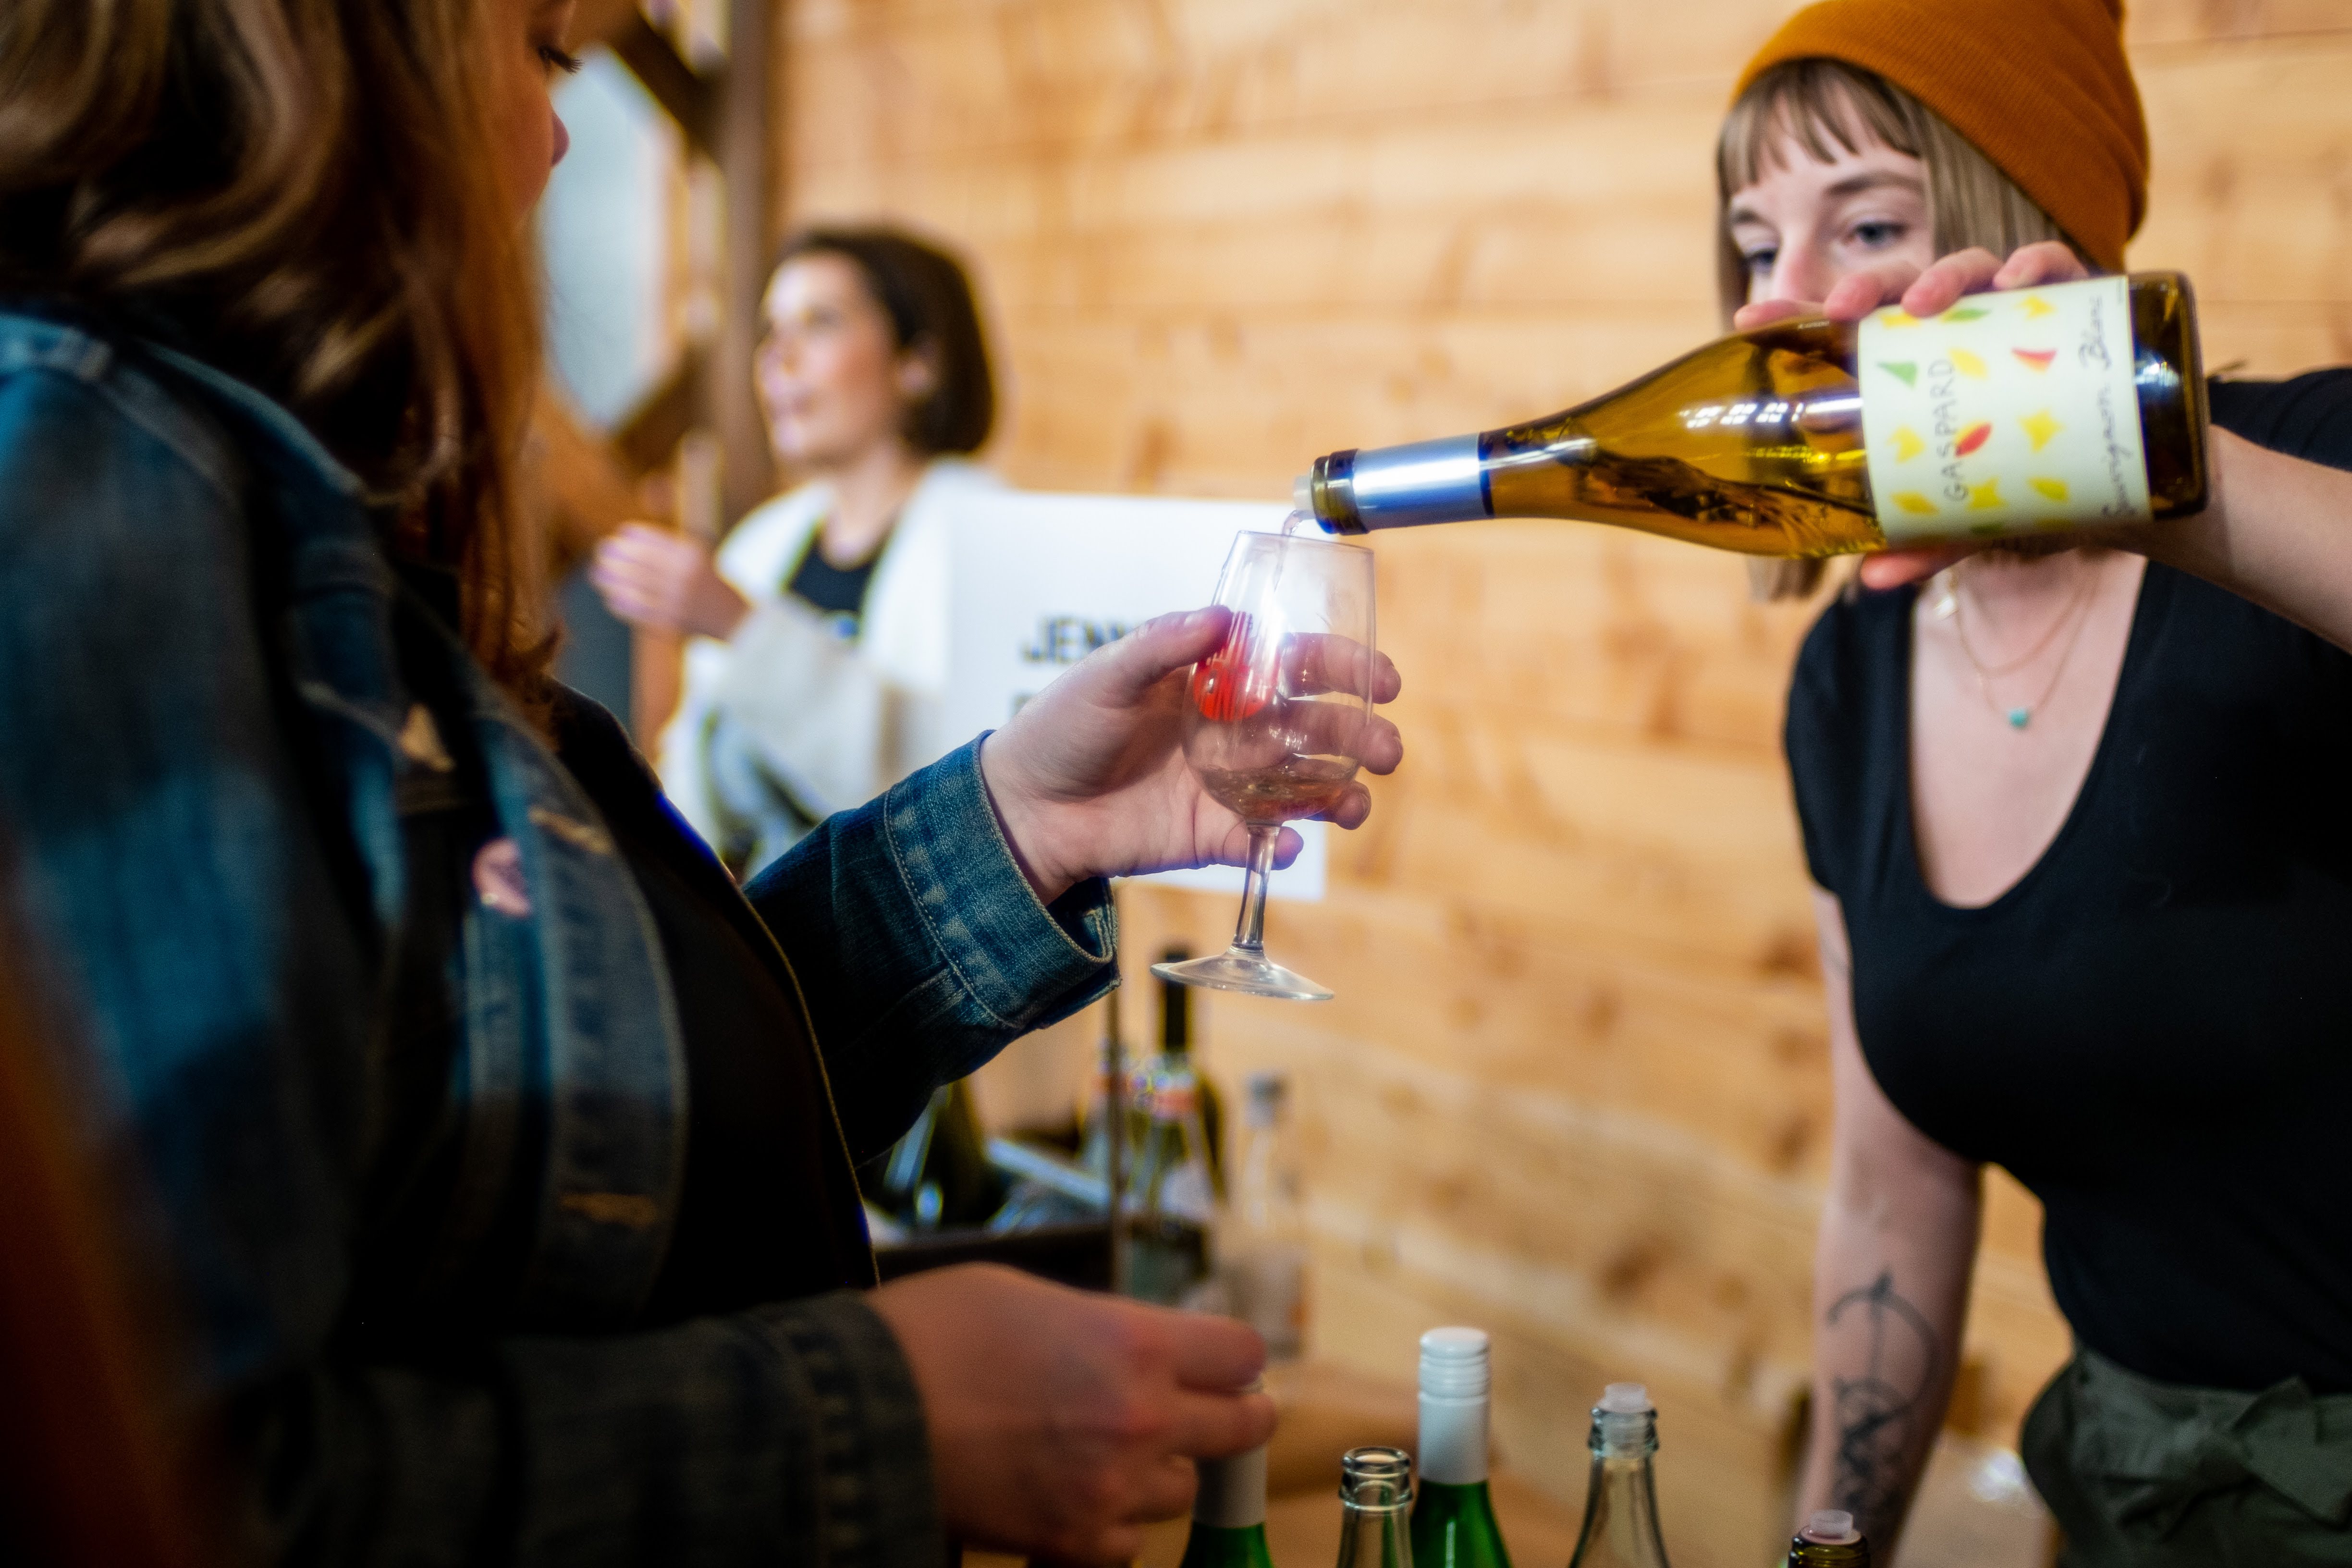 This Week In Portland Food News: A Natural Wine Bar Arrives